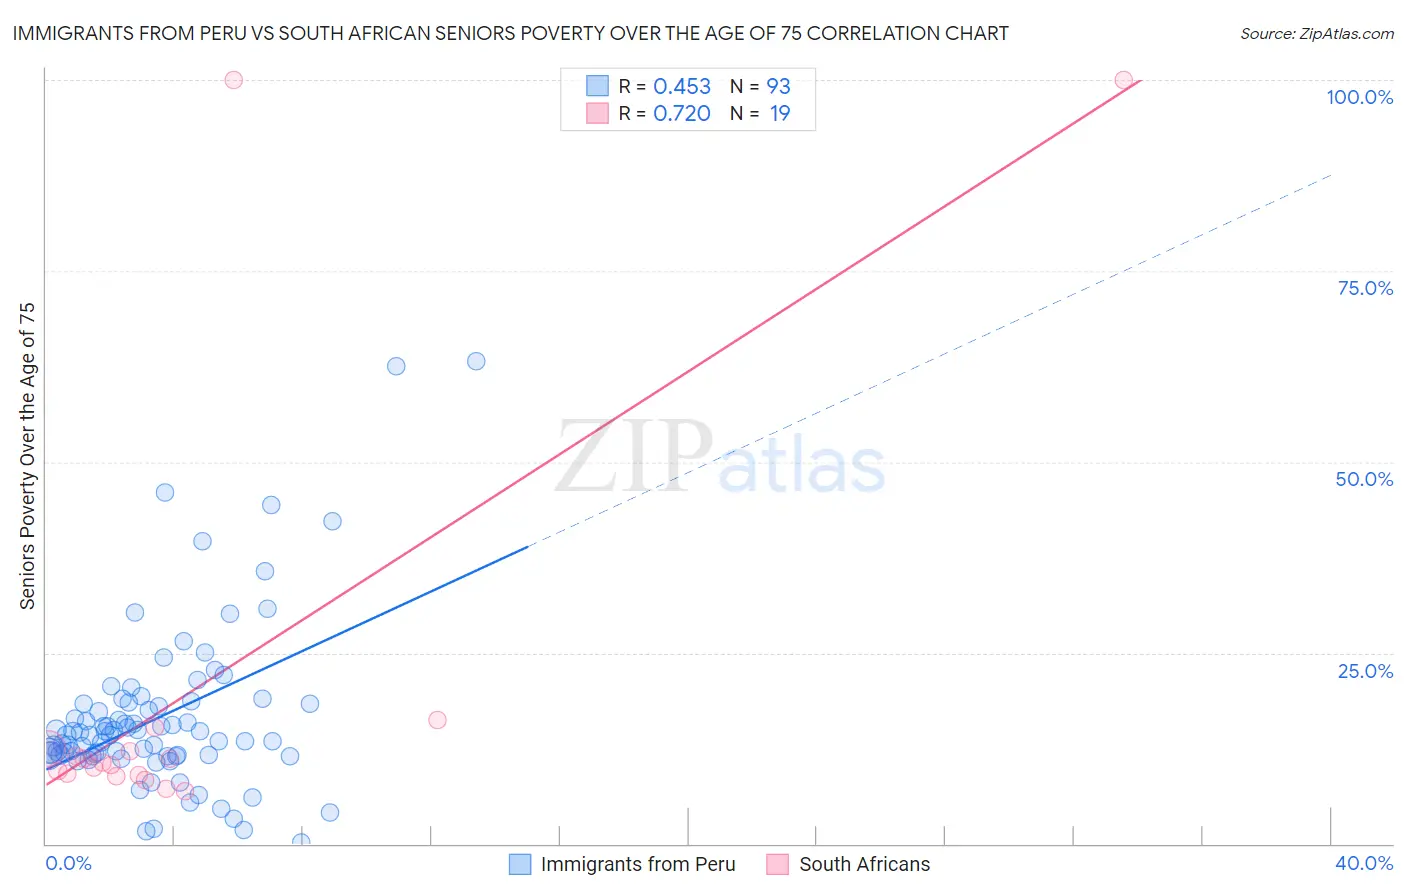 Immigrants from Peru vs South African Seniors Poverty Over the Age of 75